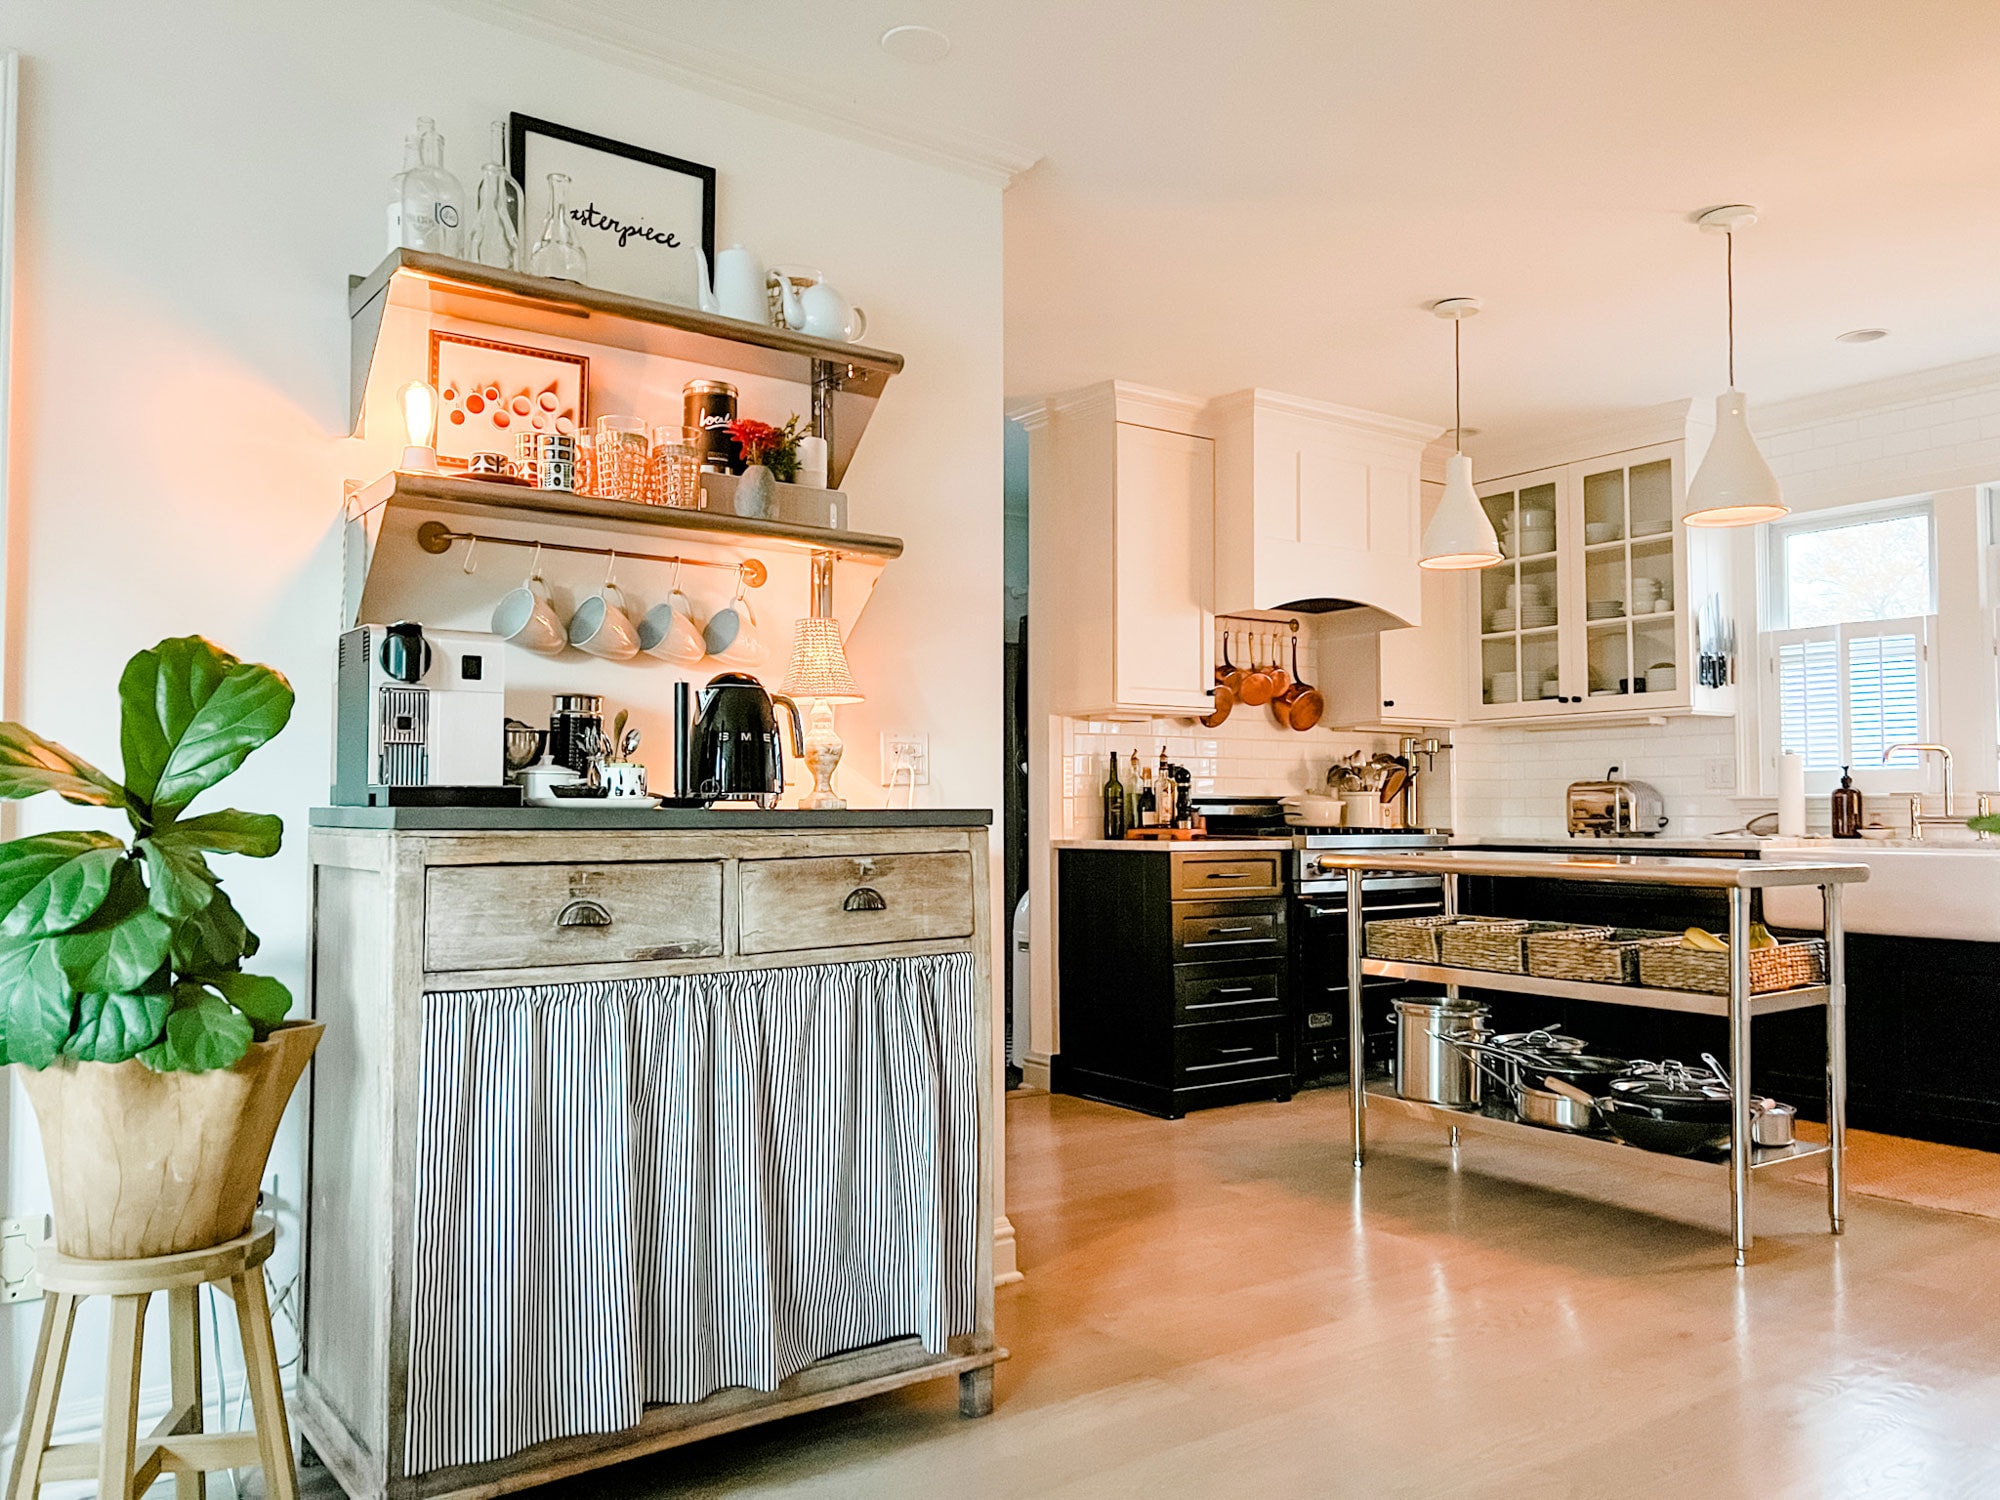 https://mostlovelythings.com/wp-content/uploads/2022/11/coffee-bar-in-kitchen.jpg